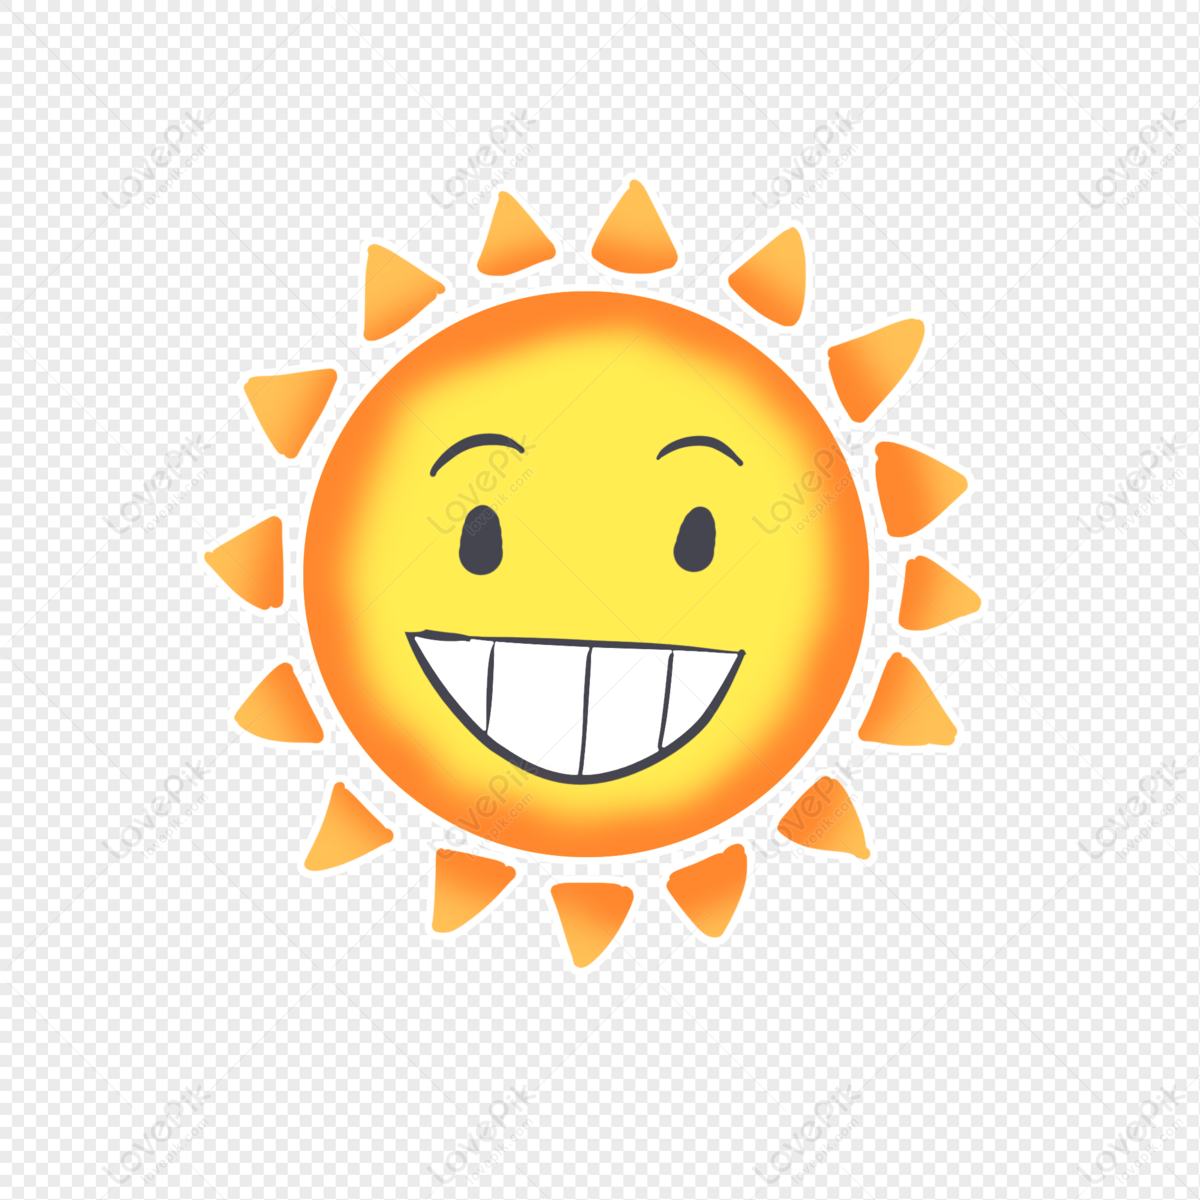 Smile Face Sun Cartoon PNG White Transparent And Clipart Image For Free  Download - Lovepik | 401115272